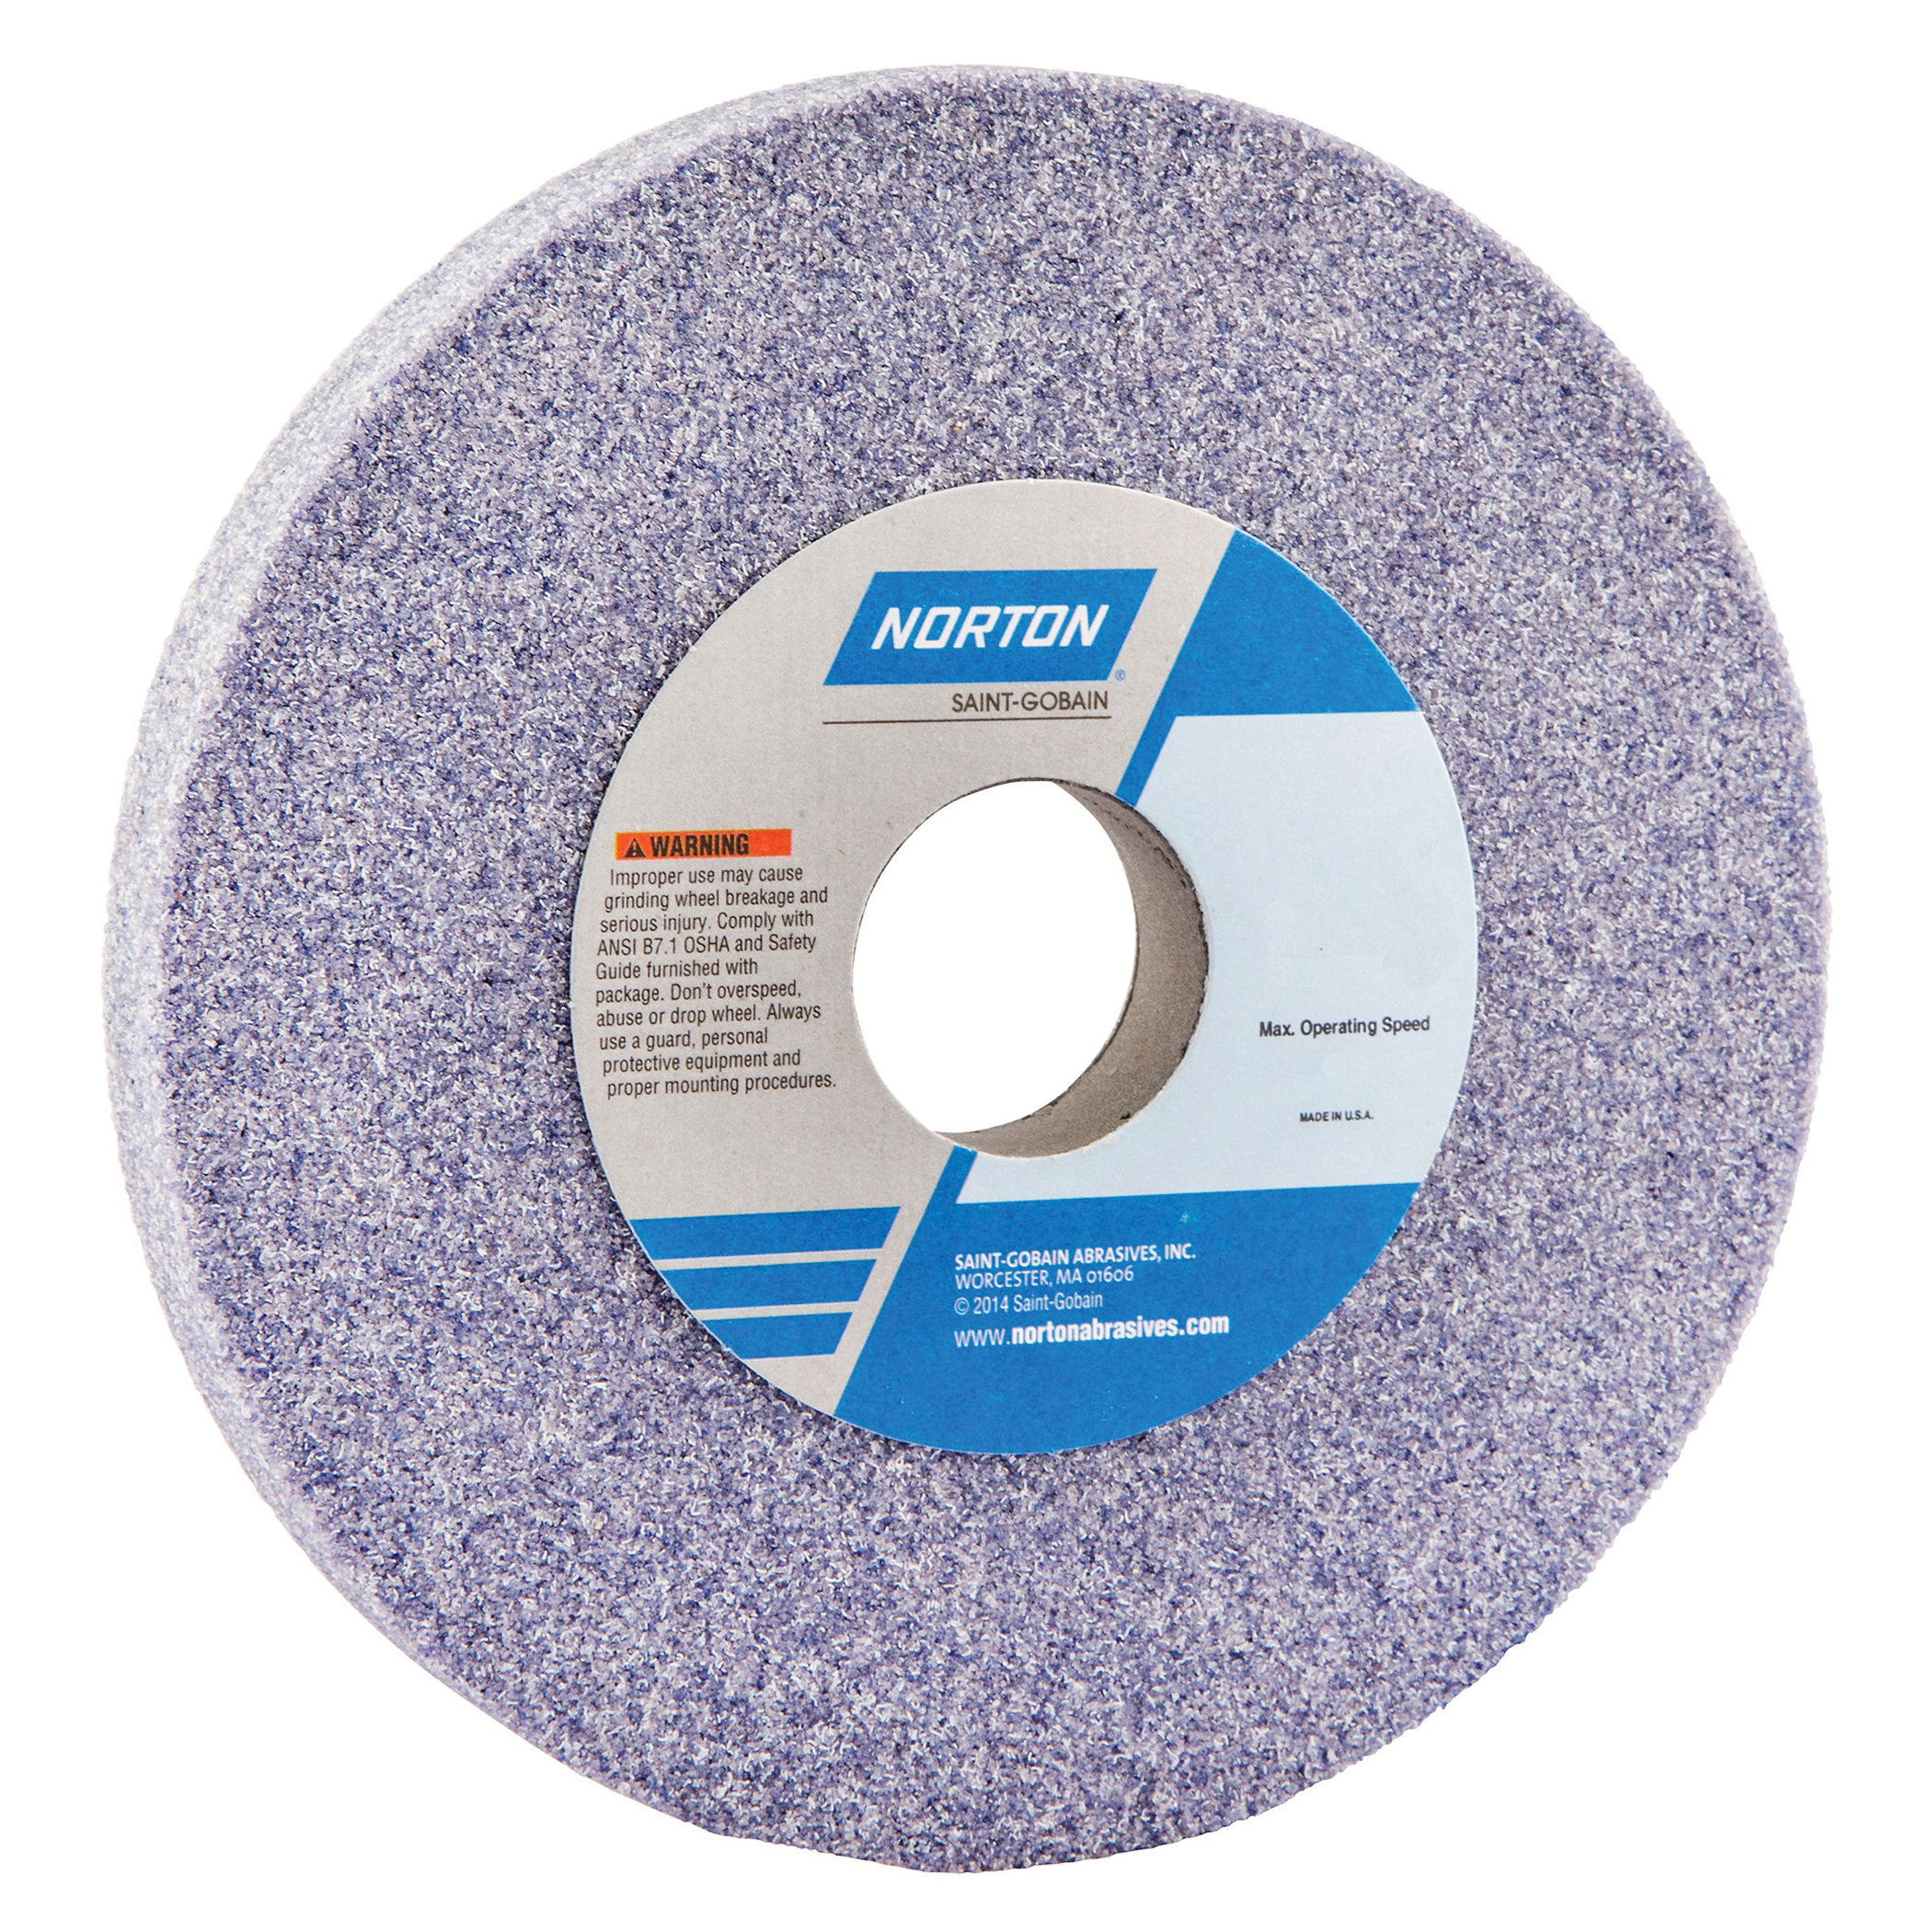 Norton® 66253363919 32A Straight Toolroom Wheel, 14 in Dia x 1 in THK, 5 in Center Hole, 46 Grit, Aluminum Oxide Abrasive